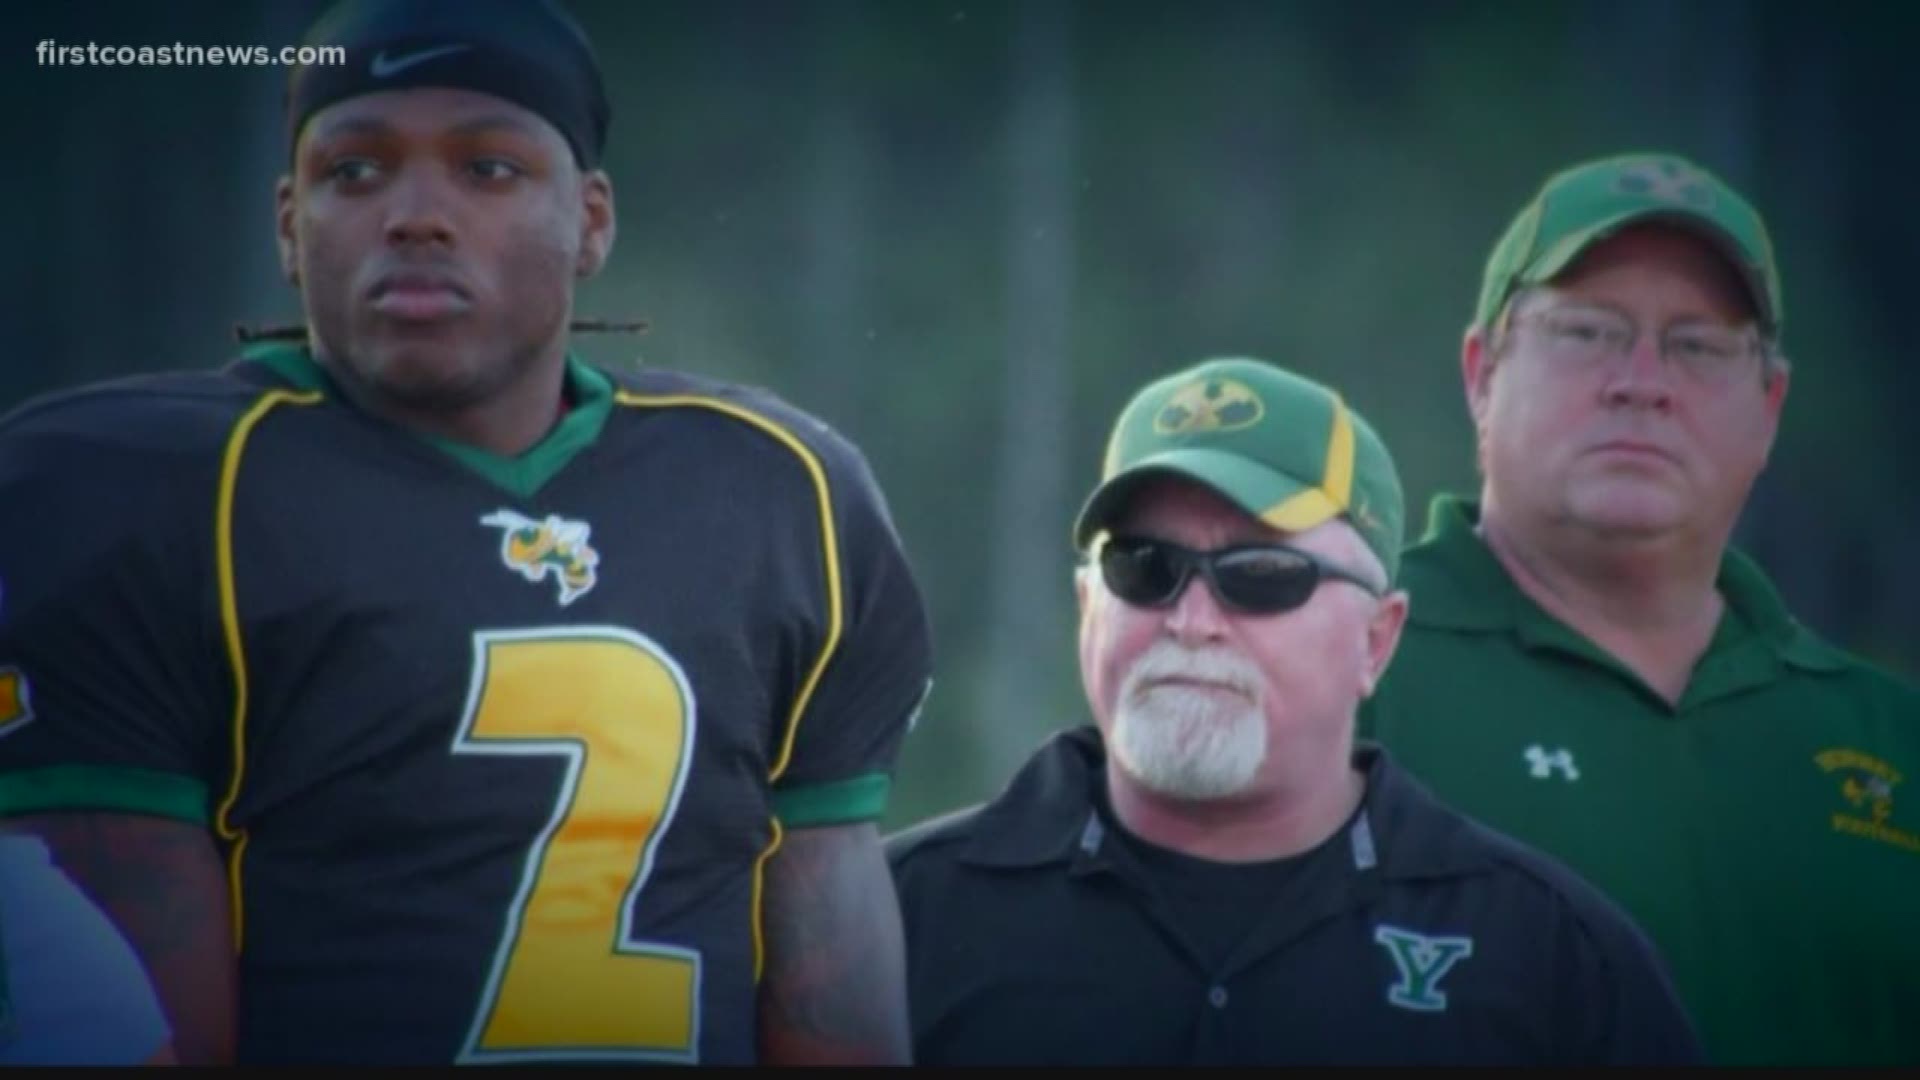 Yulee High School lost one of its own-- longtime football coach Pat Dunlap.